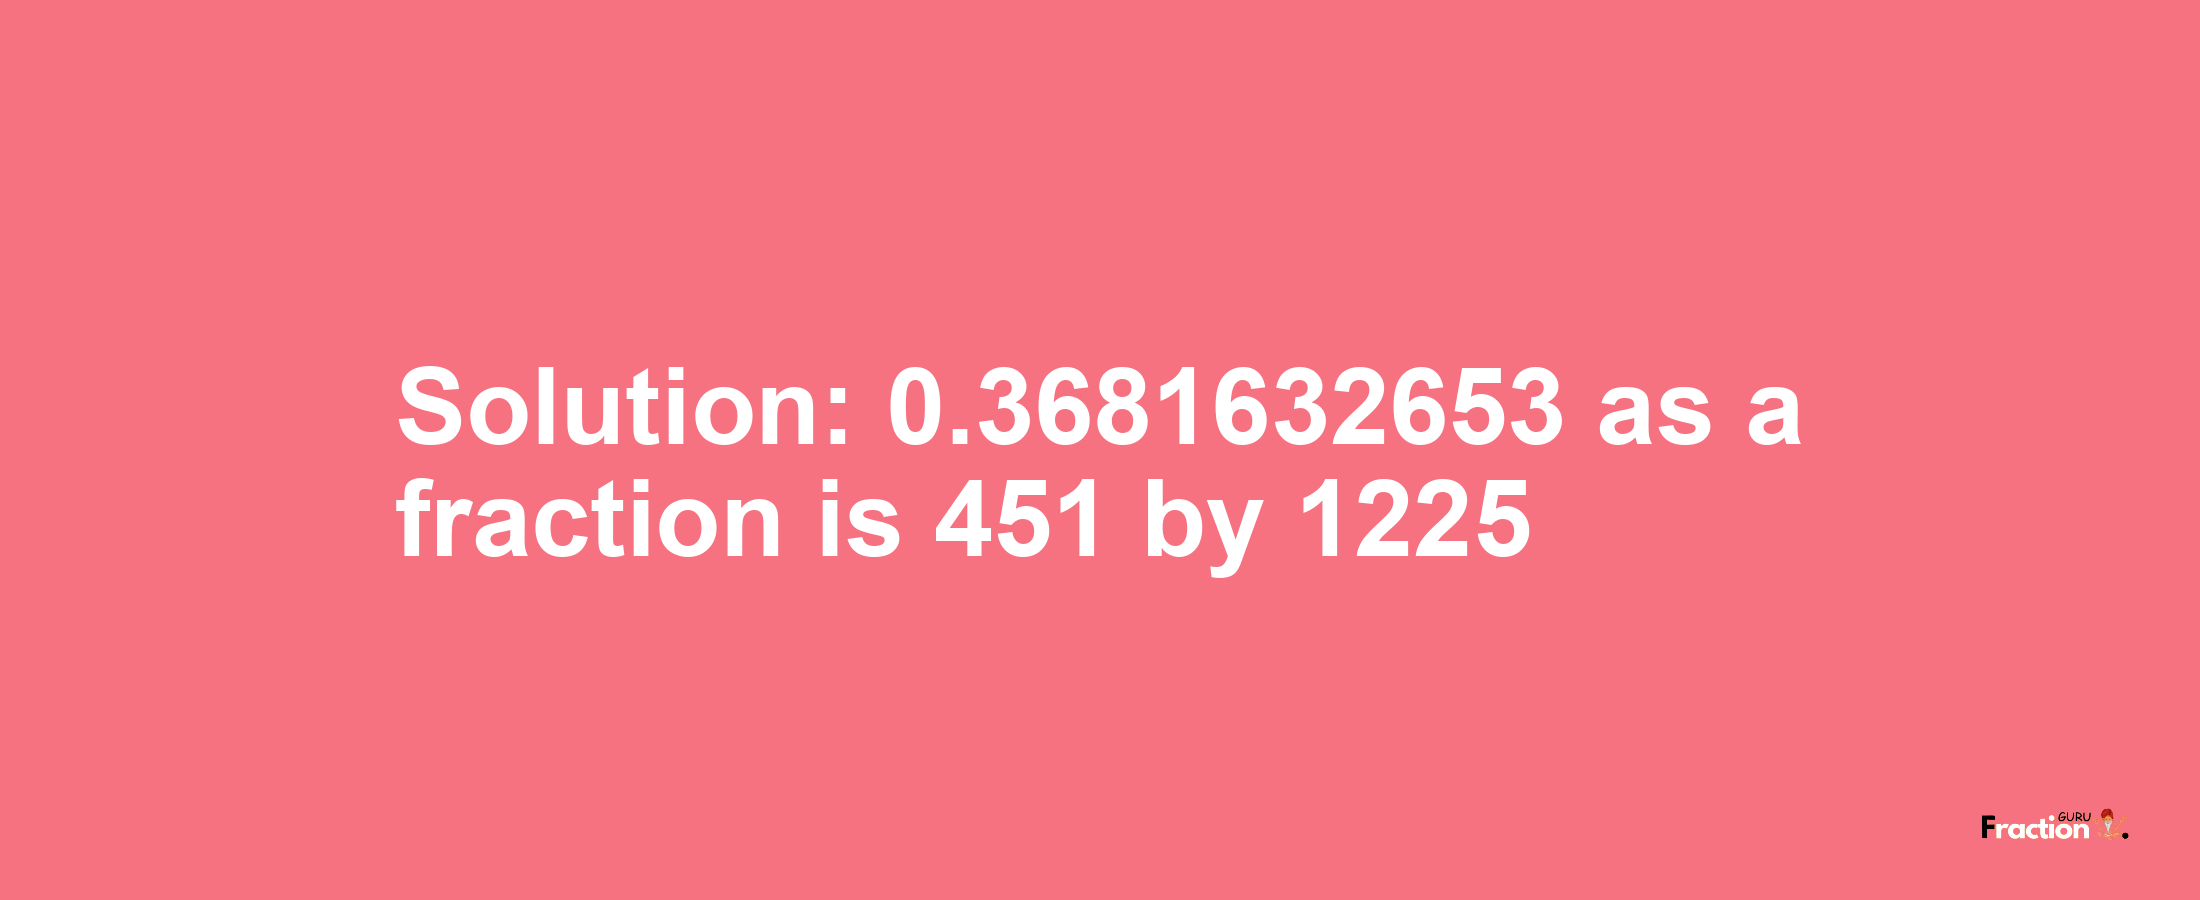 Solution:0.3681632653 as a fraction is 451/1225